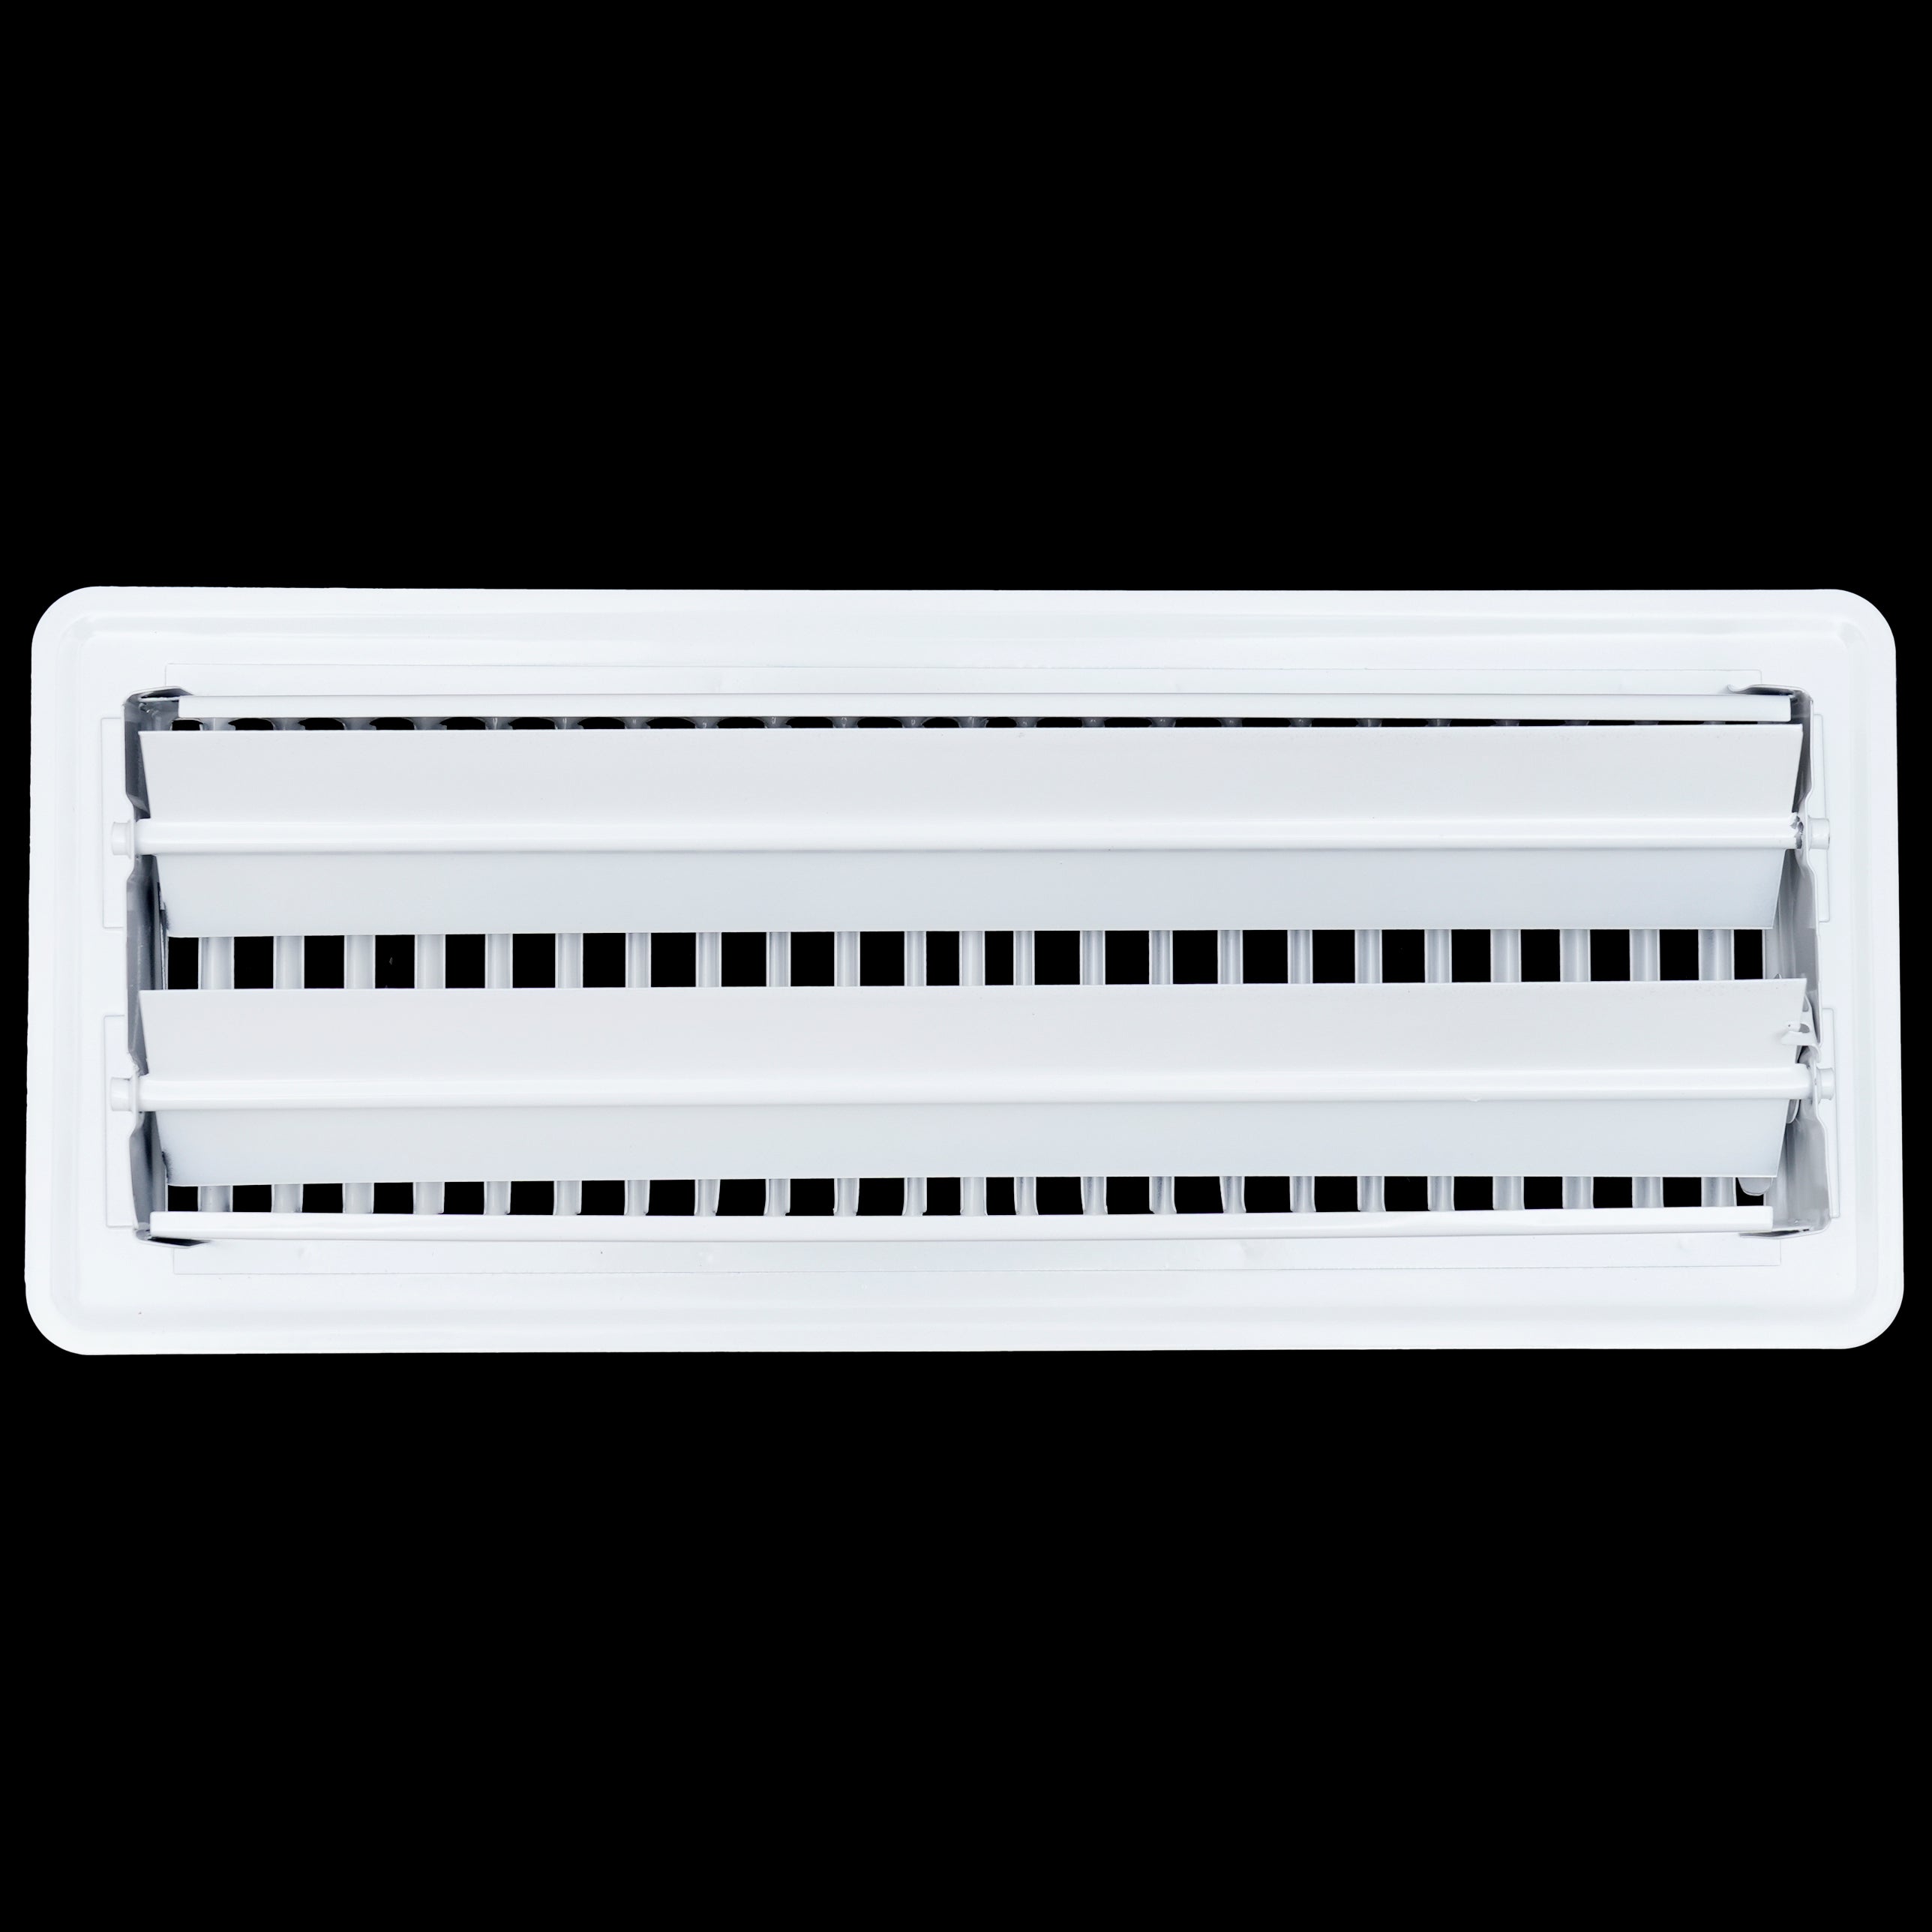 4" x 12"  Floor Register with Louvered Design | Heavy Duty Walkable Design with Damper | Floor Vent Grille | Easy to Adjust Air Supply lever | White